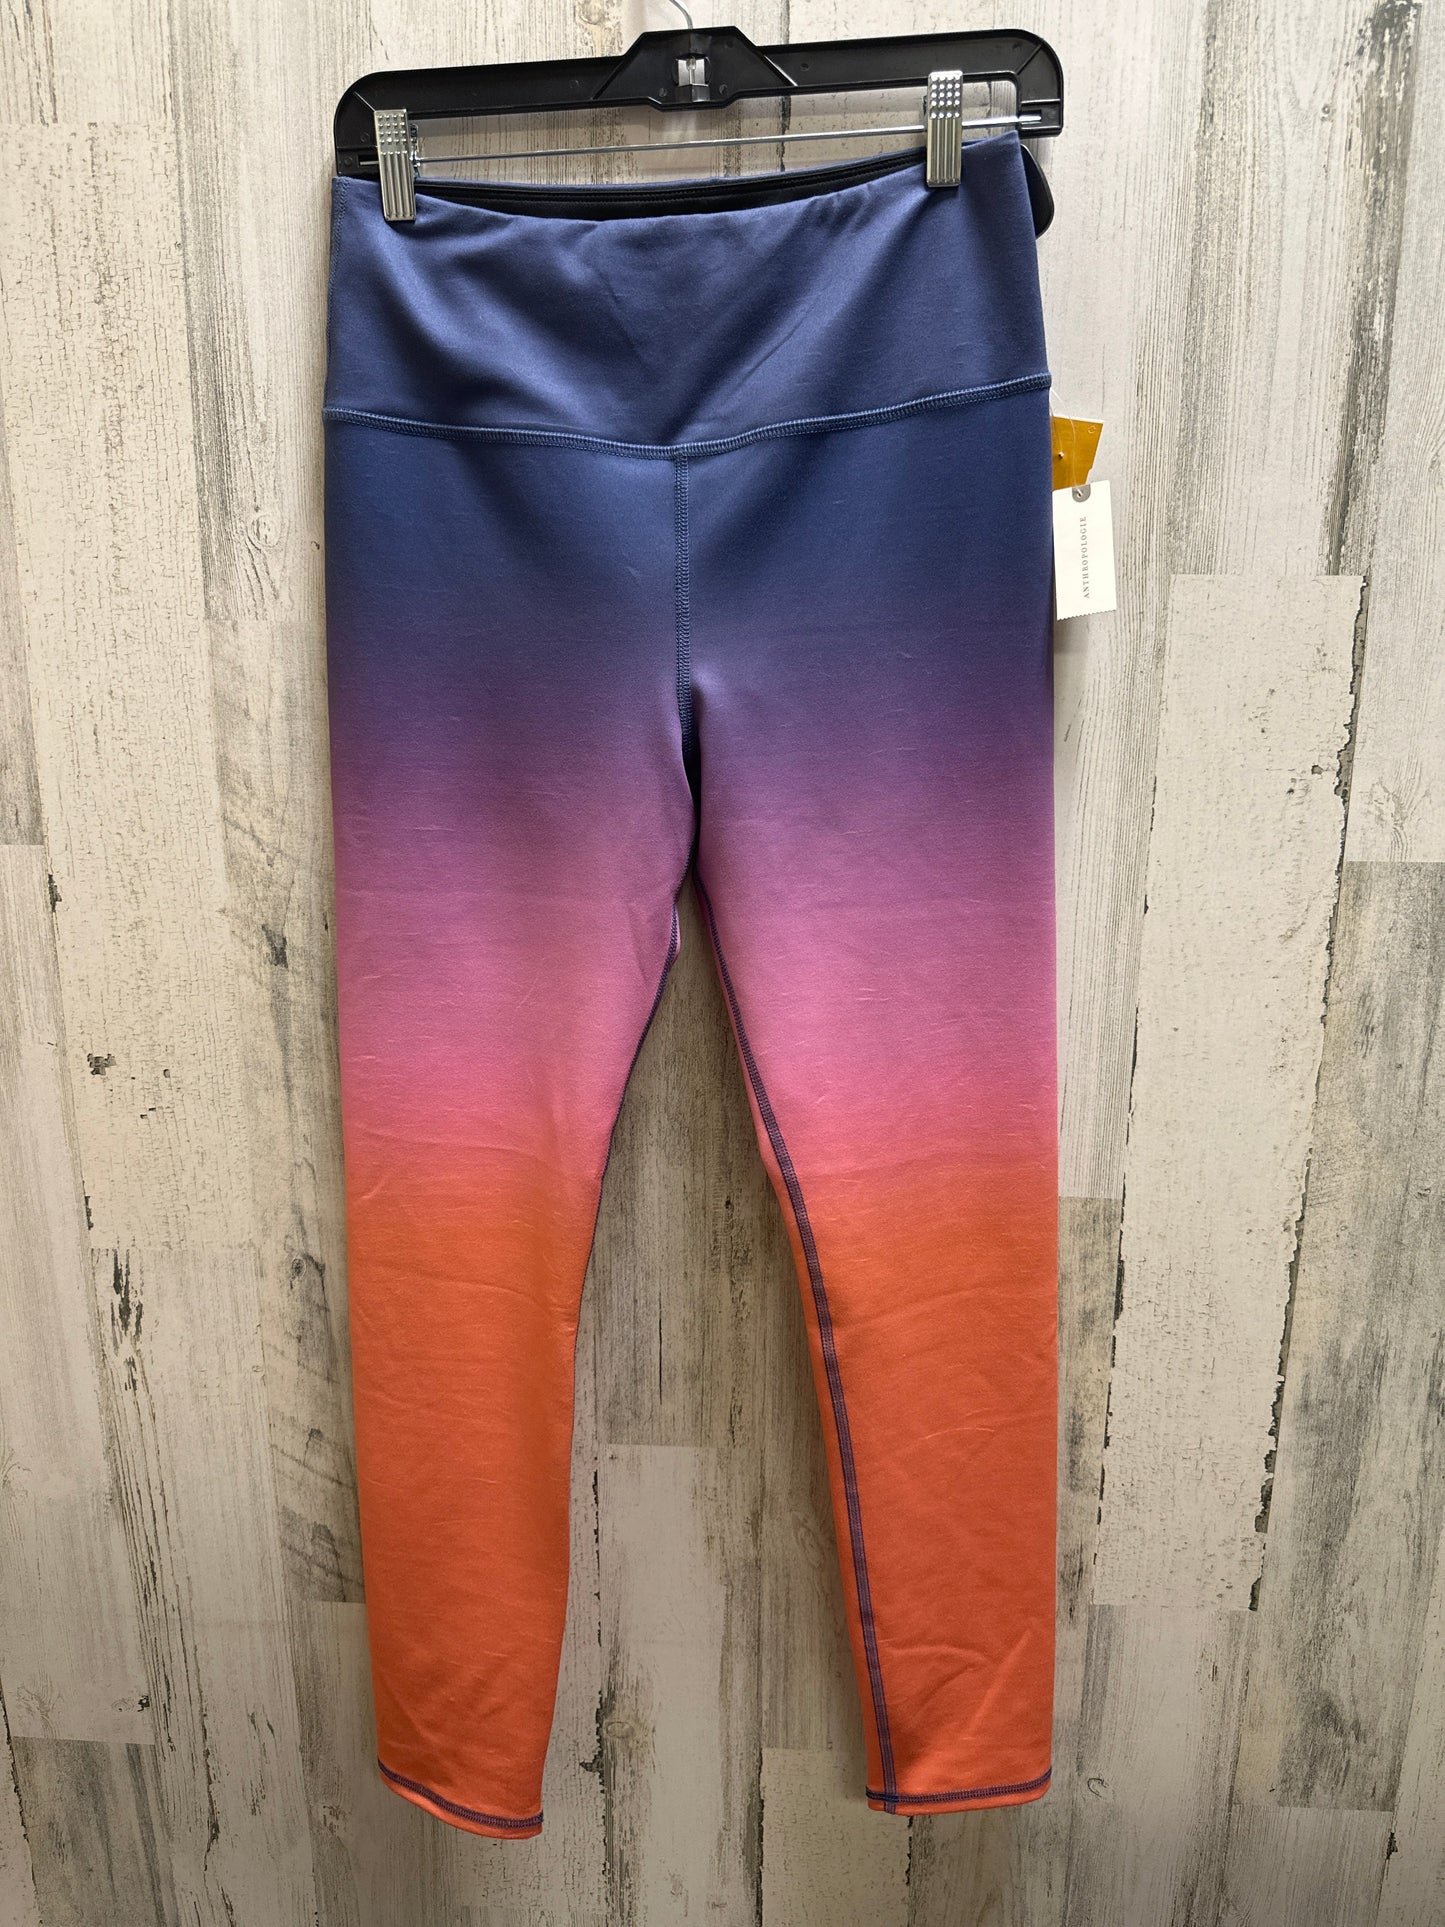 Multi Athletic Leggings Daily Practice By Anthropologie, Size L